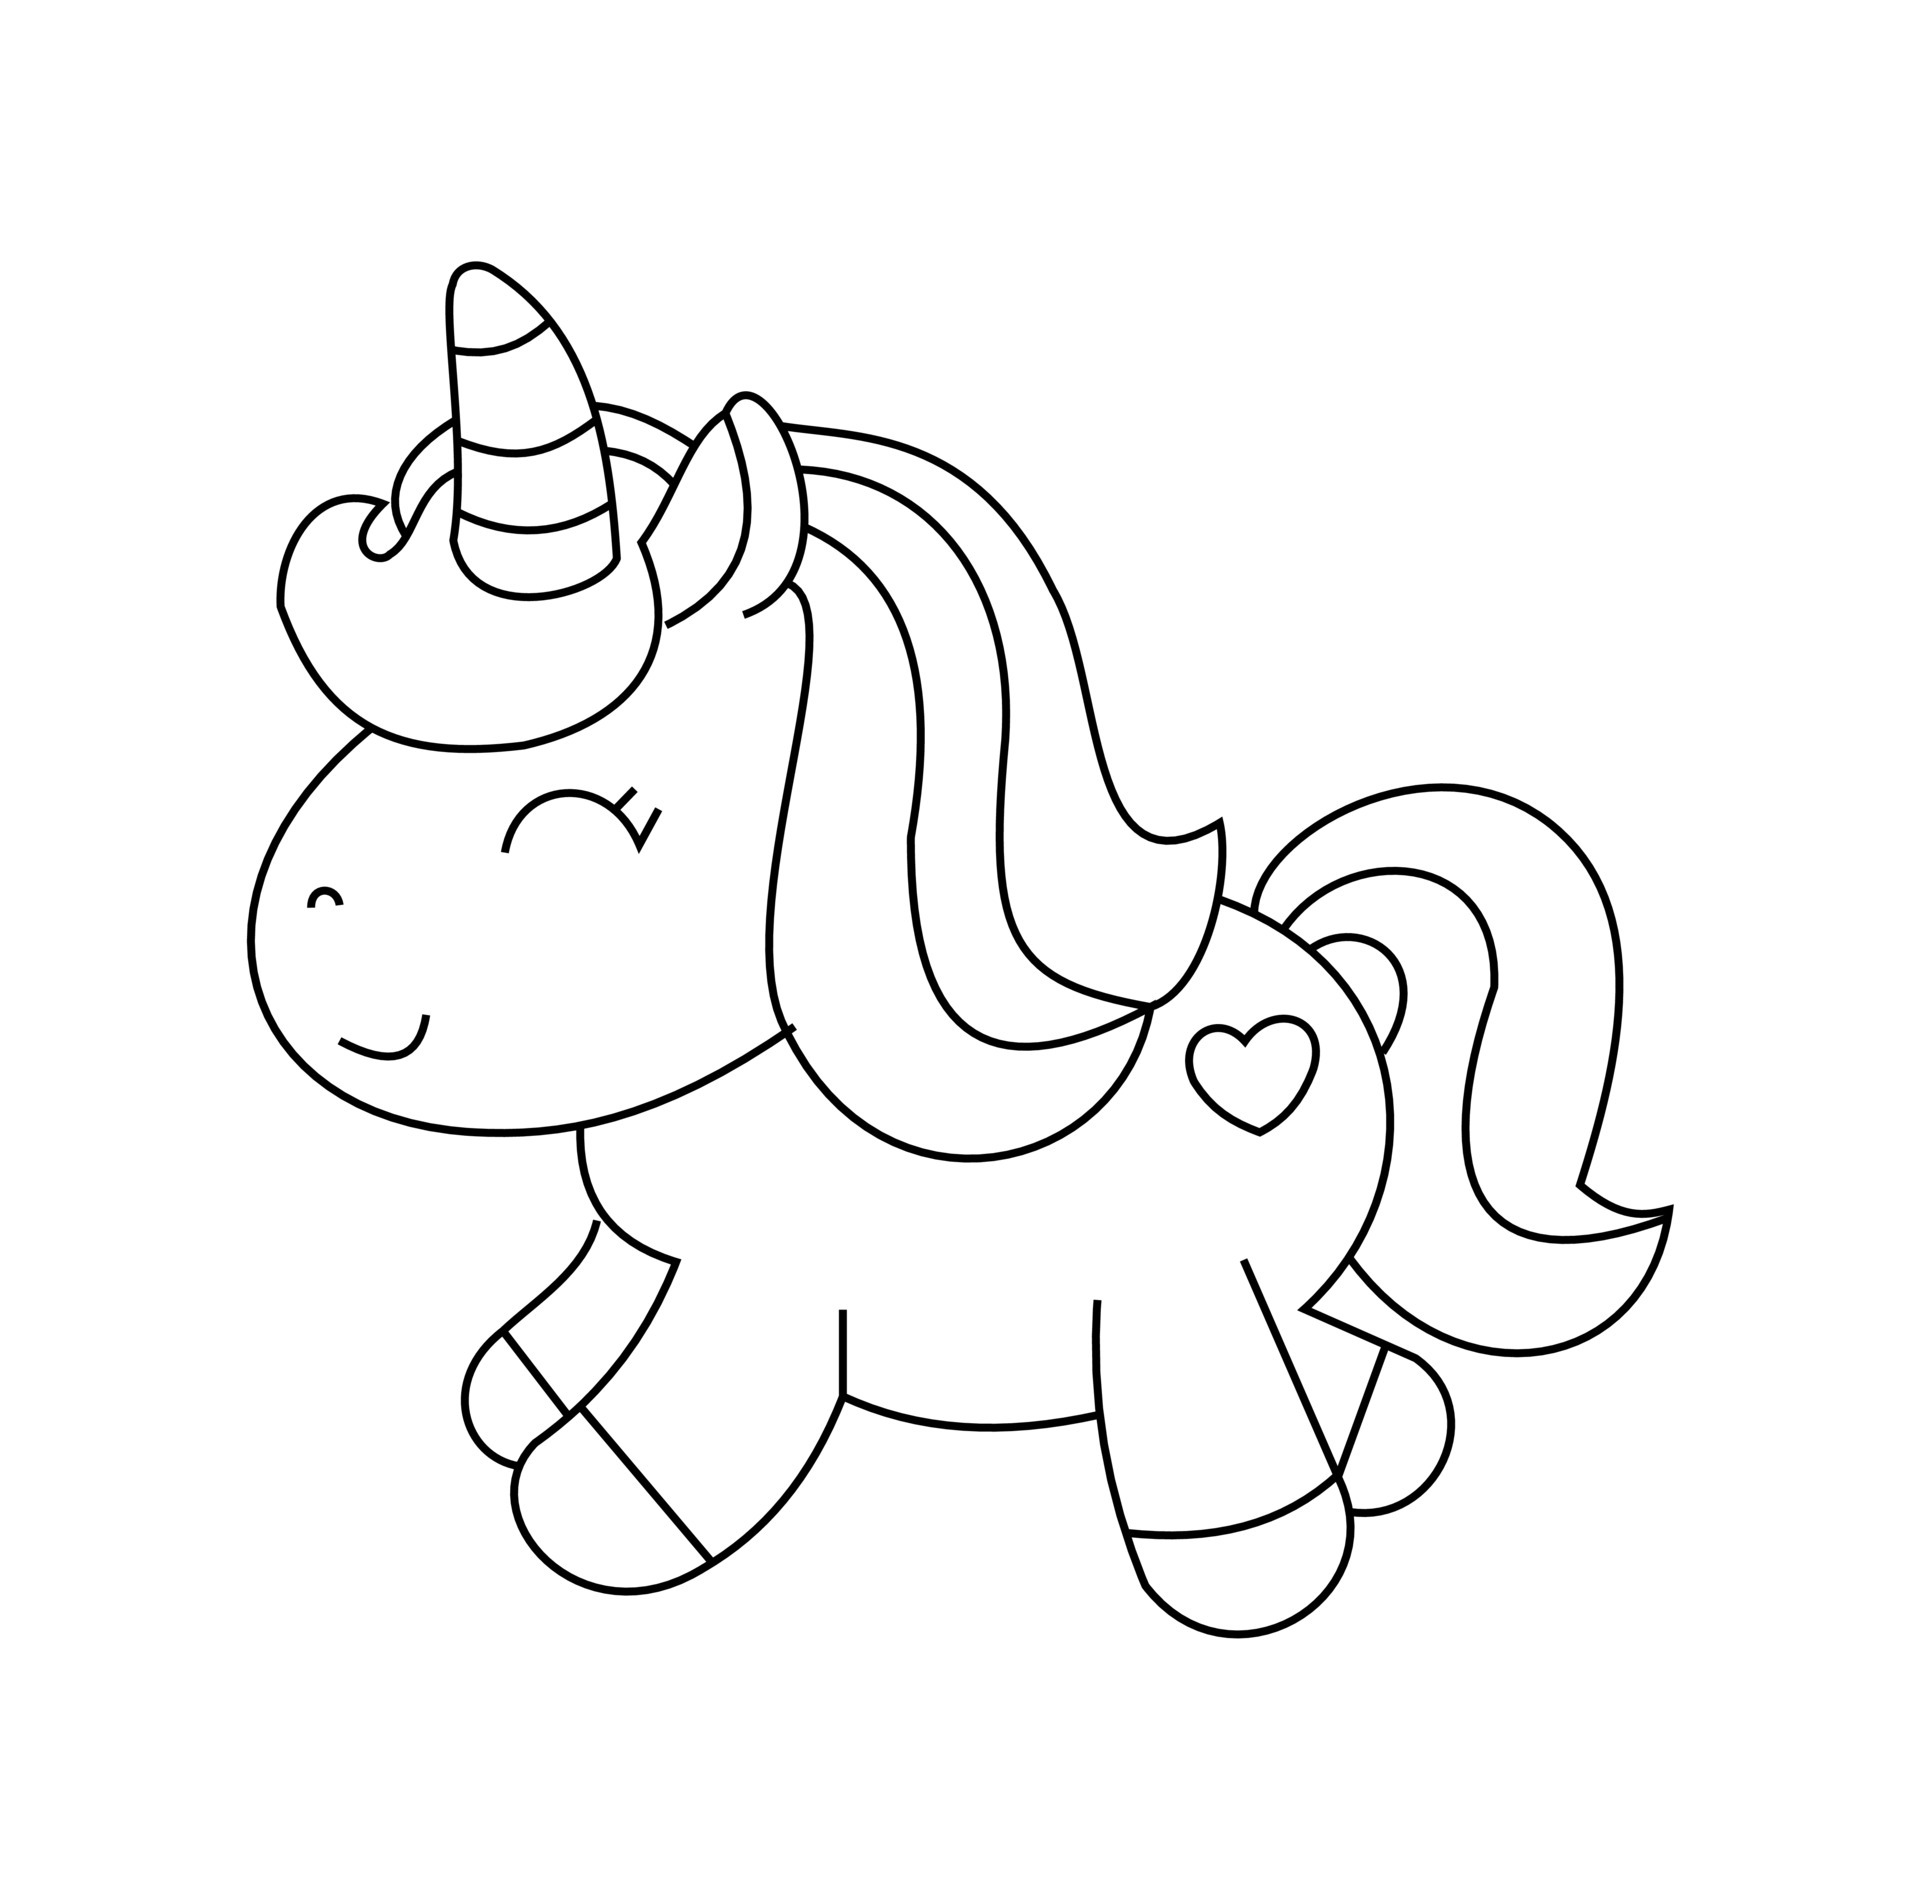 Unicorn coloring page. Cute animal coloring page. Editable vector ...